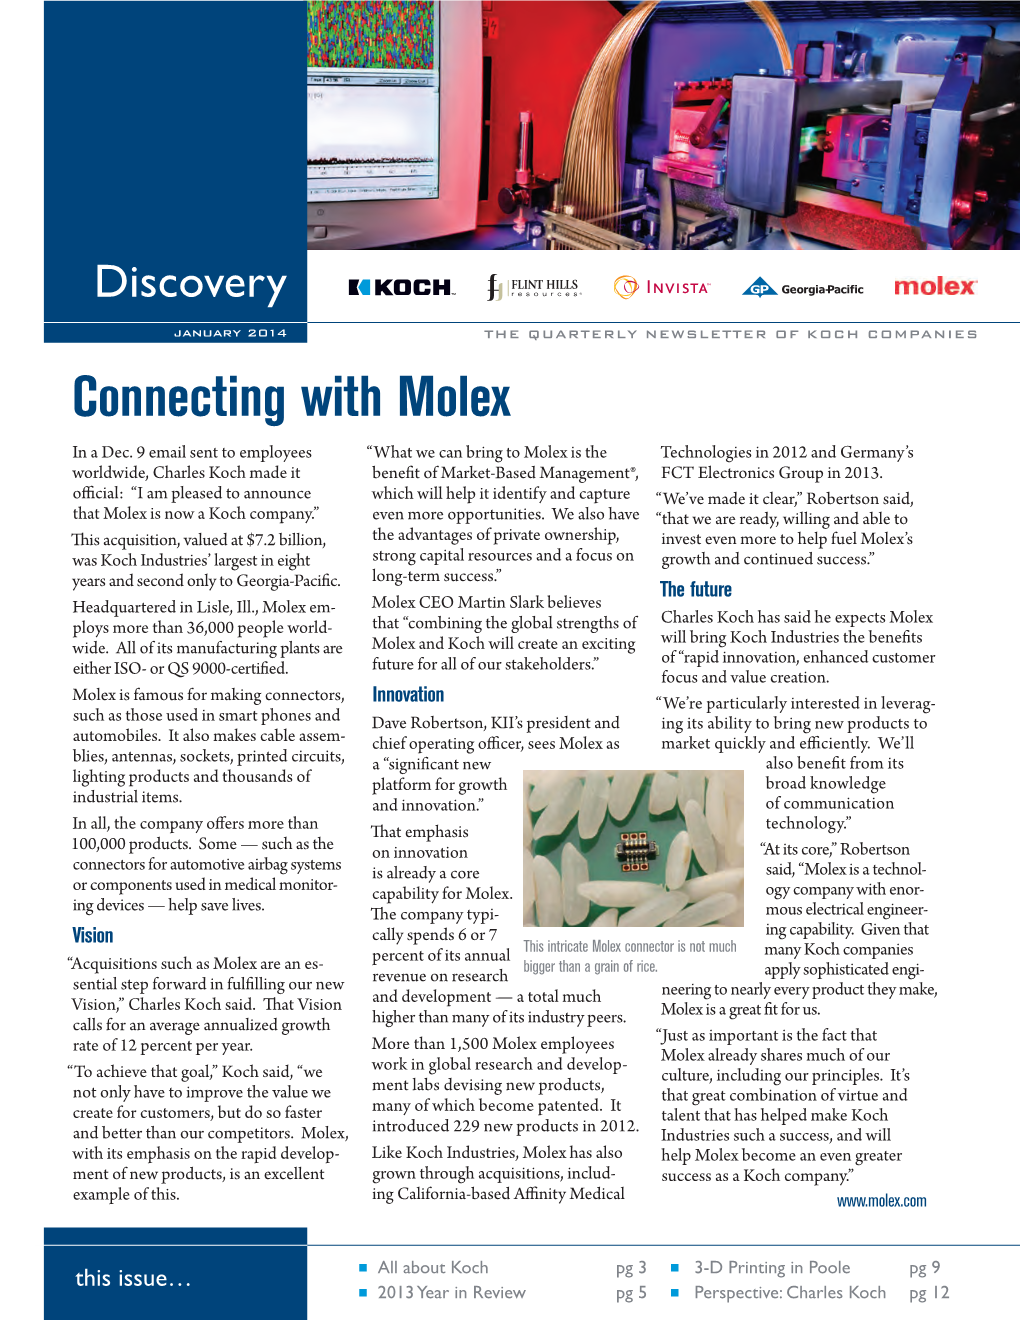 Connecting with Molex in a Dec